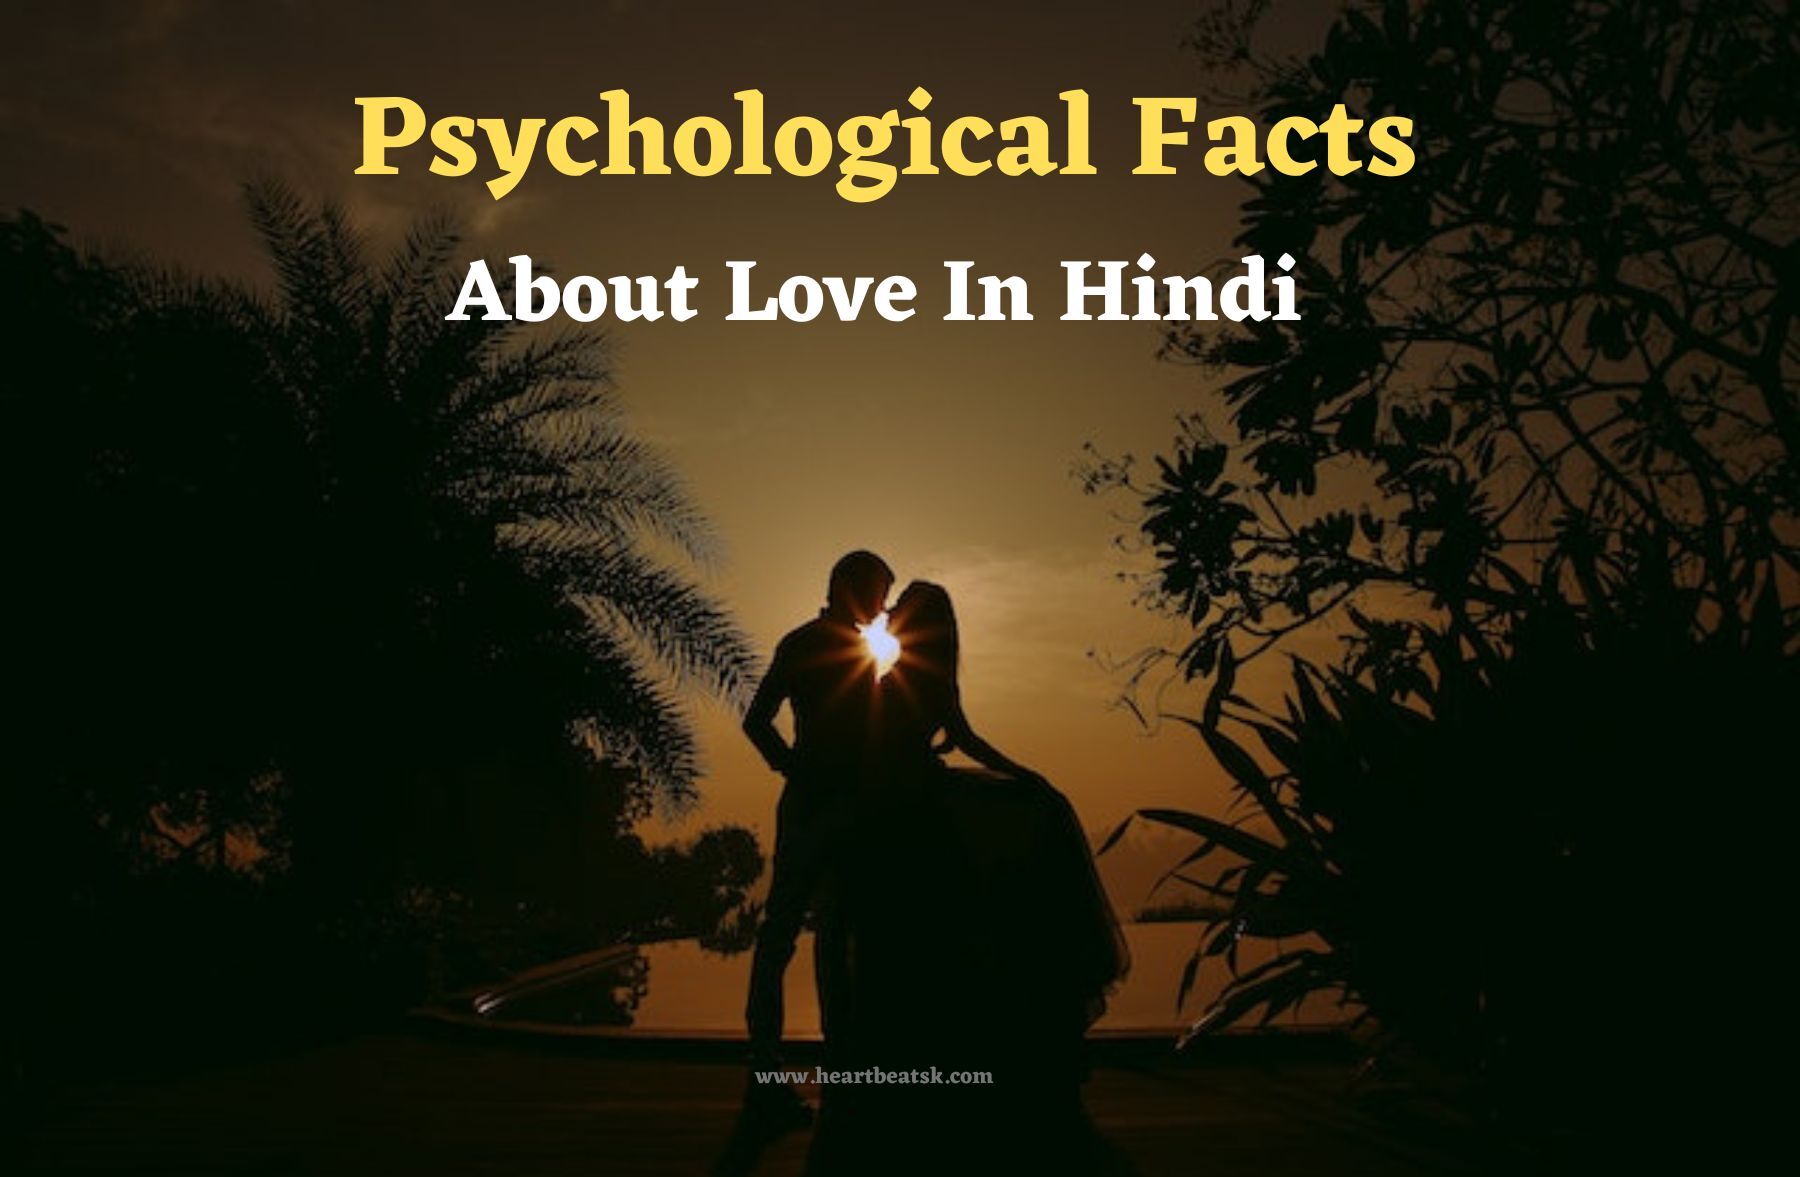 Psychological Facts About Love In Hindi